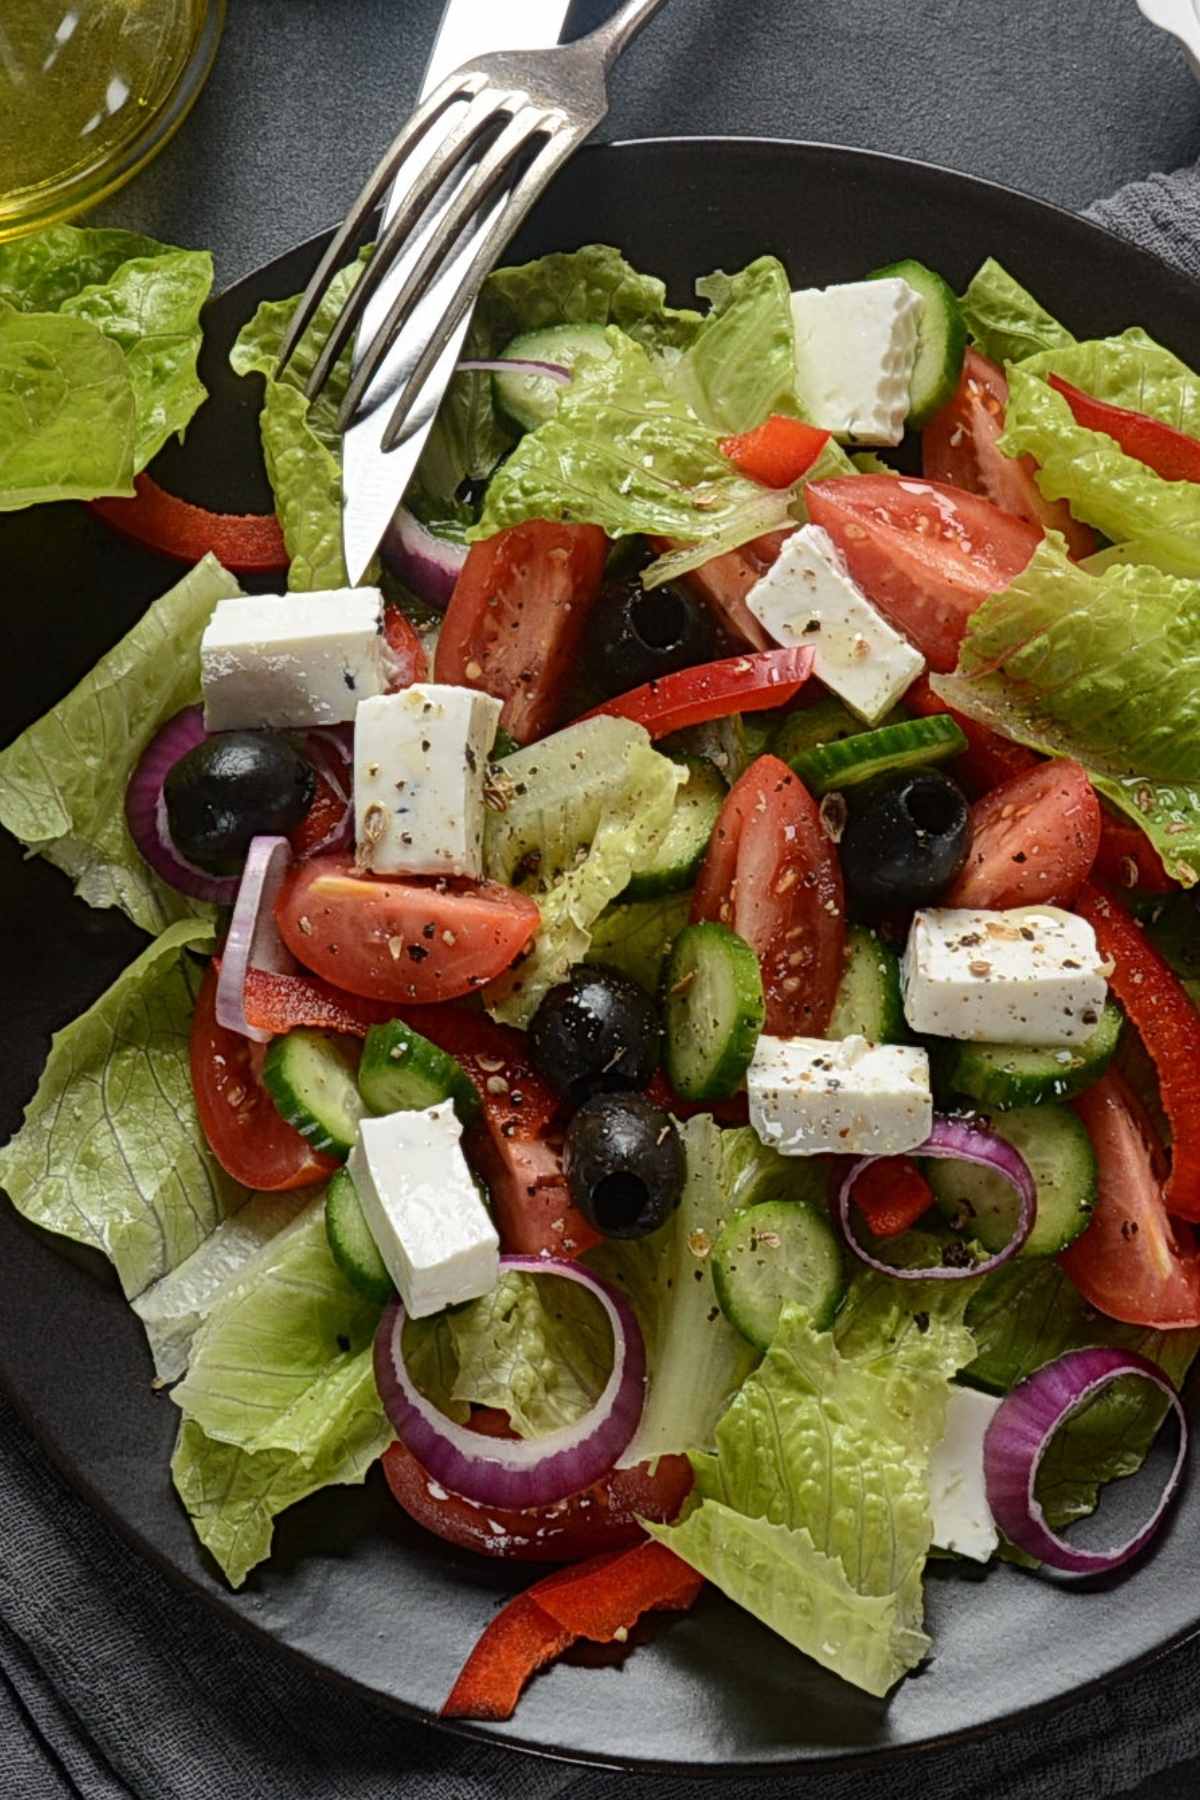 If you love the flavor of the salad dressing at your favorite Greek restaurant, you’ve got to try this recipe. It’s a breeze to make and the flavors are absolutely amazing!